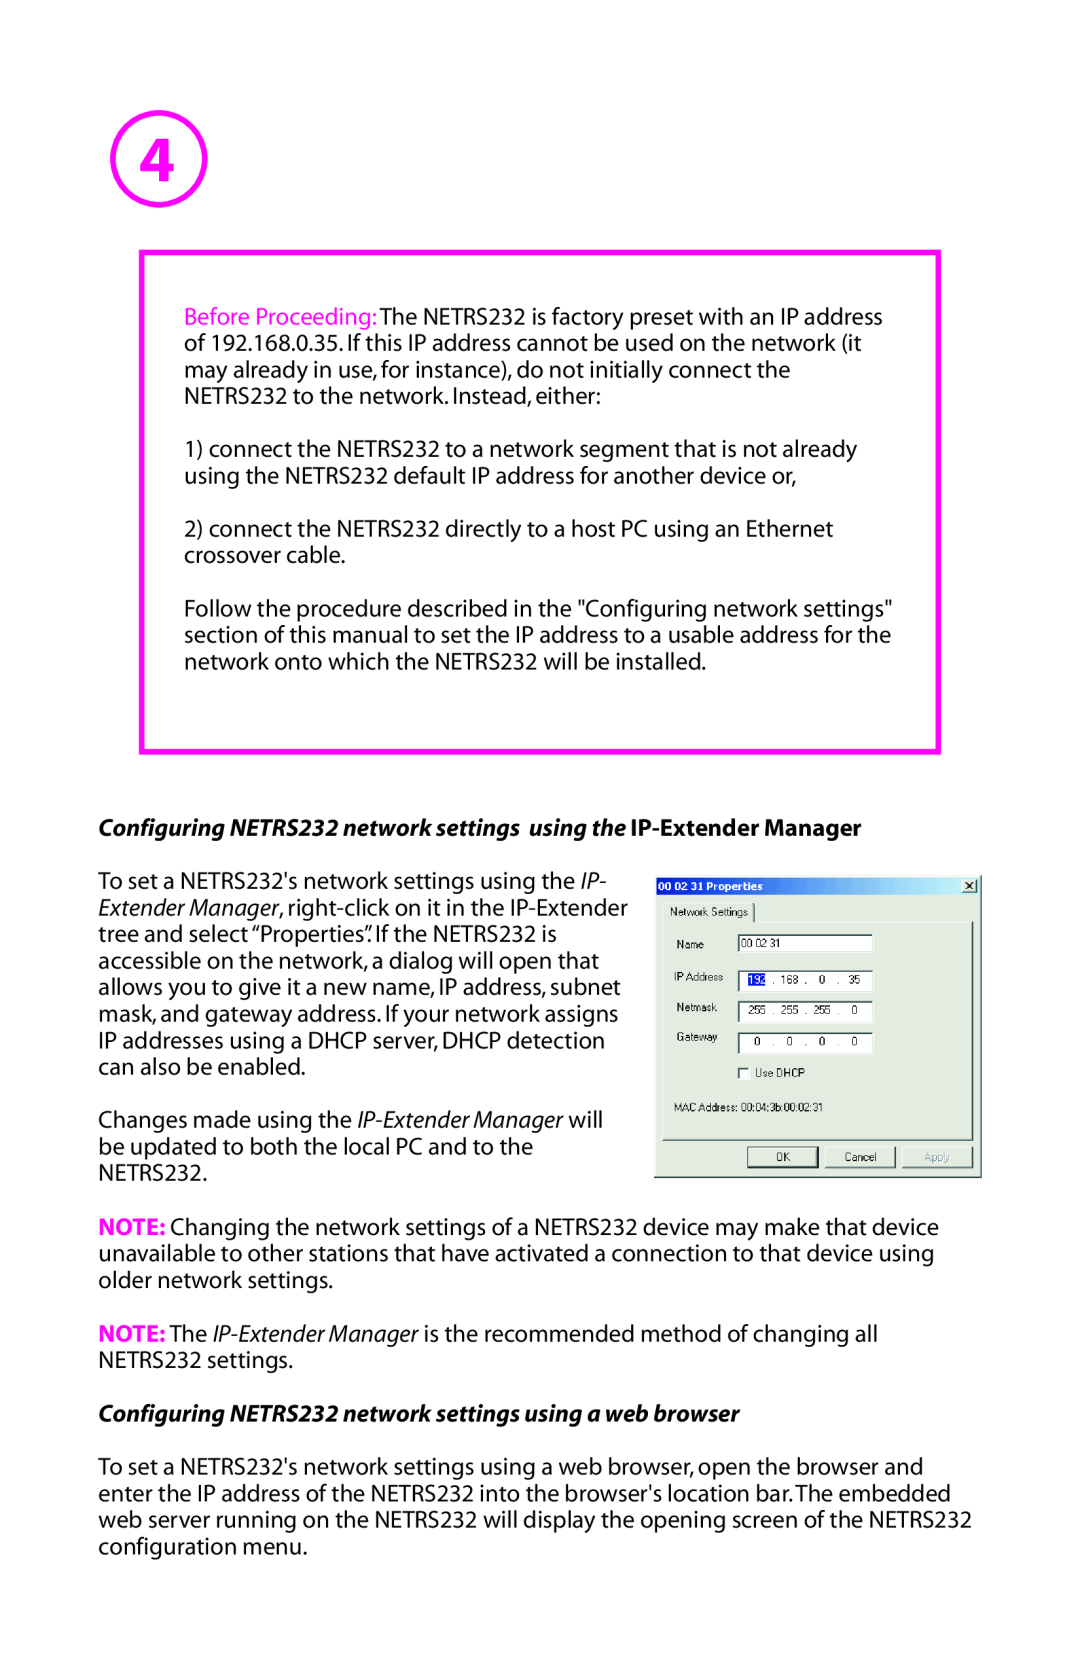 StarTech.com manual Configuring NETRS232 network settings using the IP-Extender Manager 